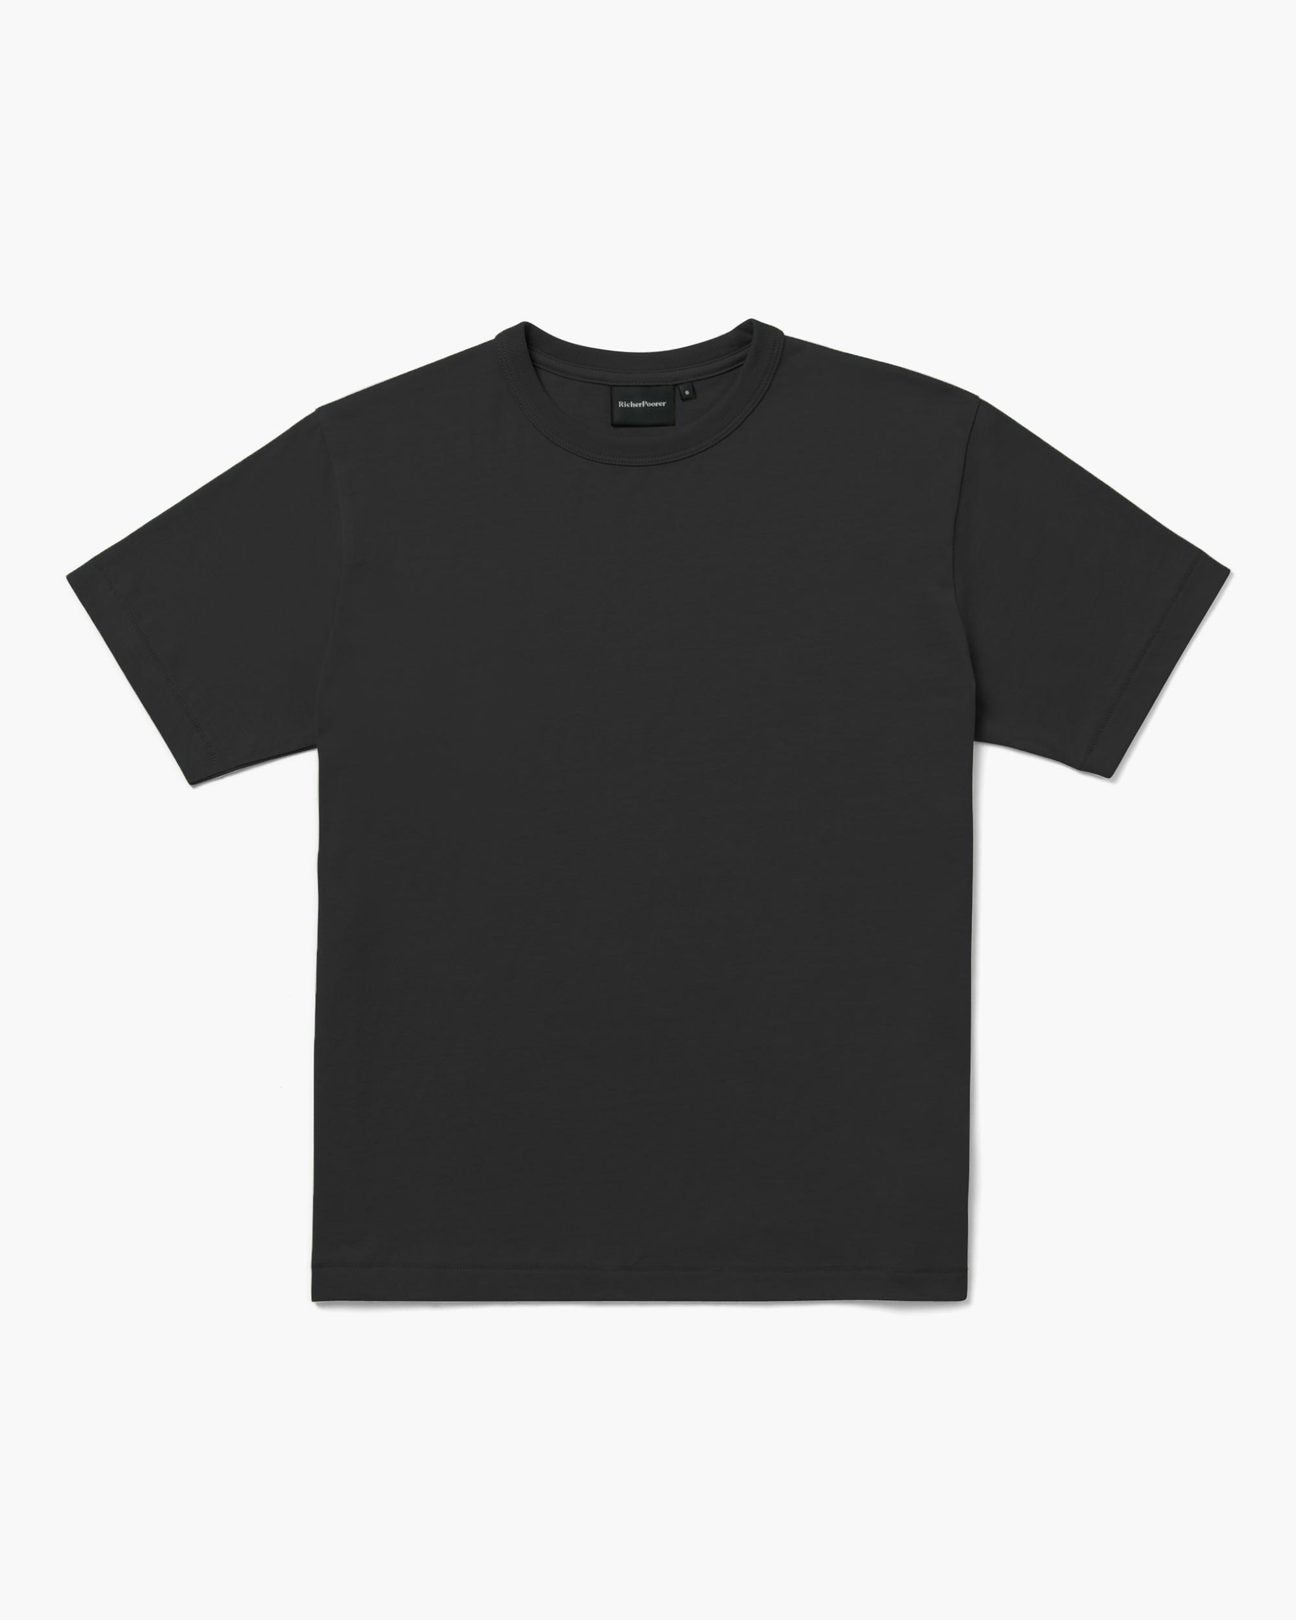 Everyday Weighted Tee- Black